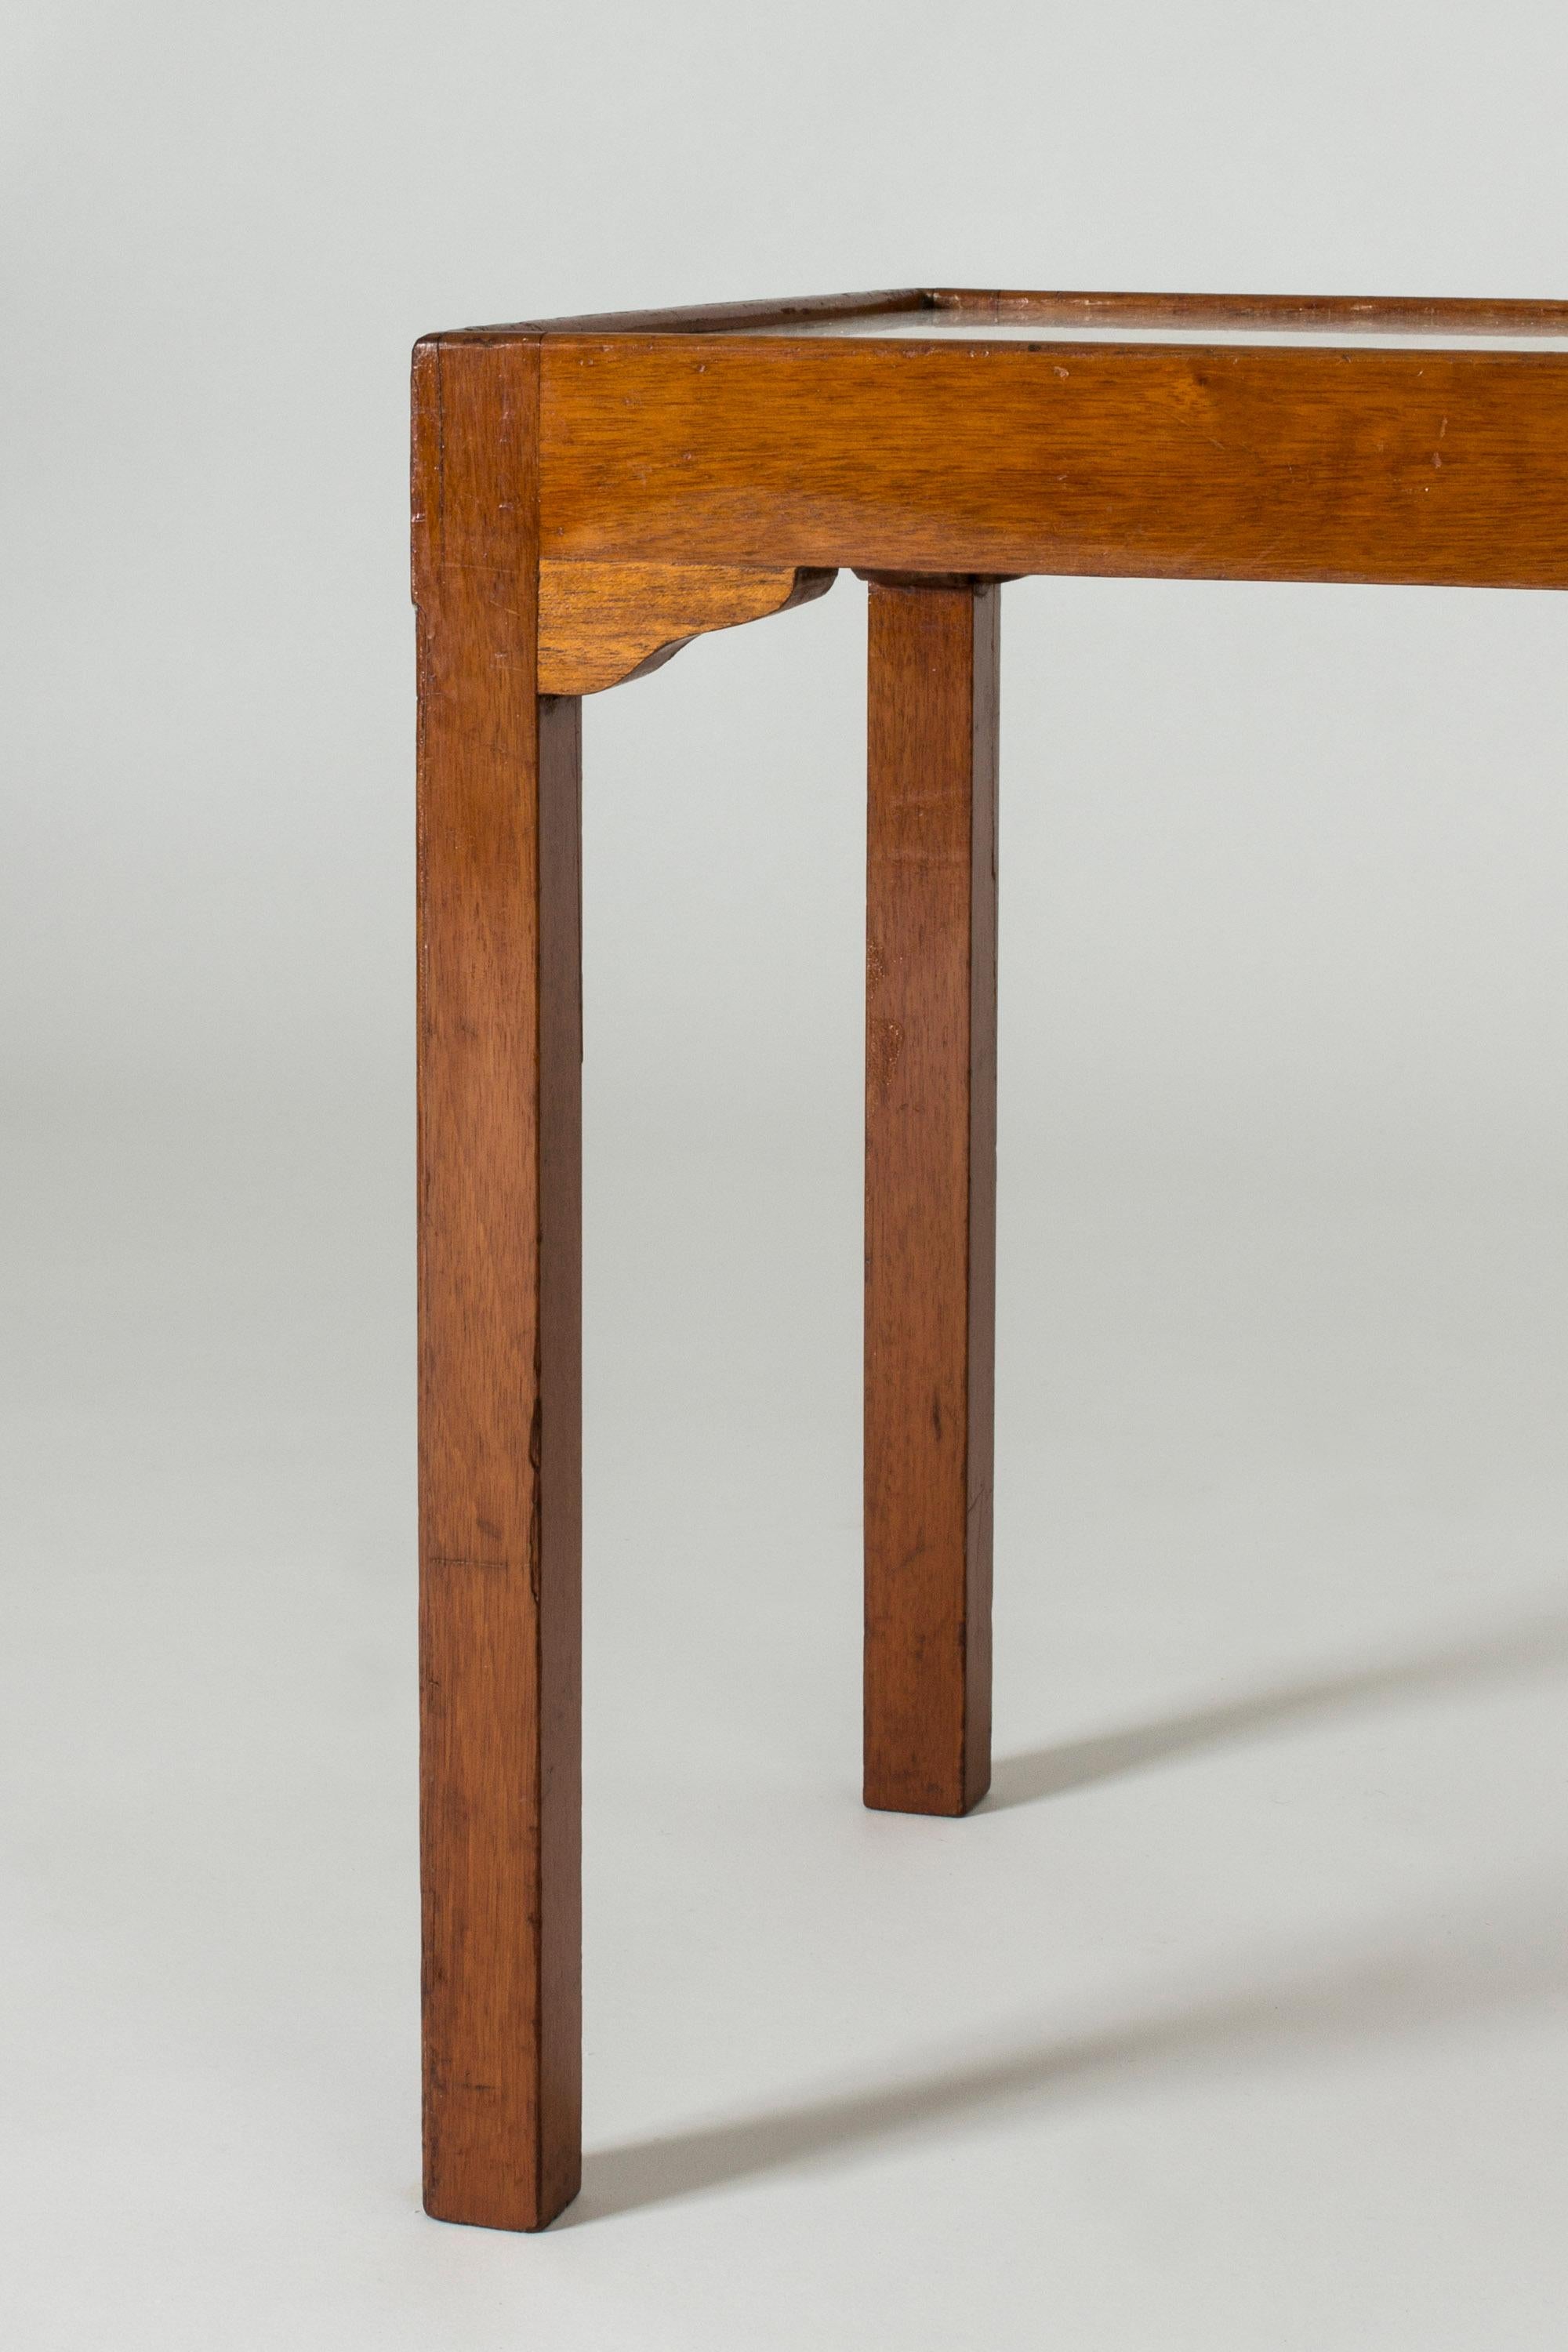 Mid-20th Century Swedish Modern Marble Side Table, Sweden, 1940s